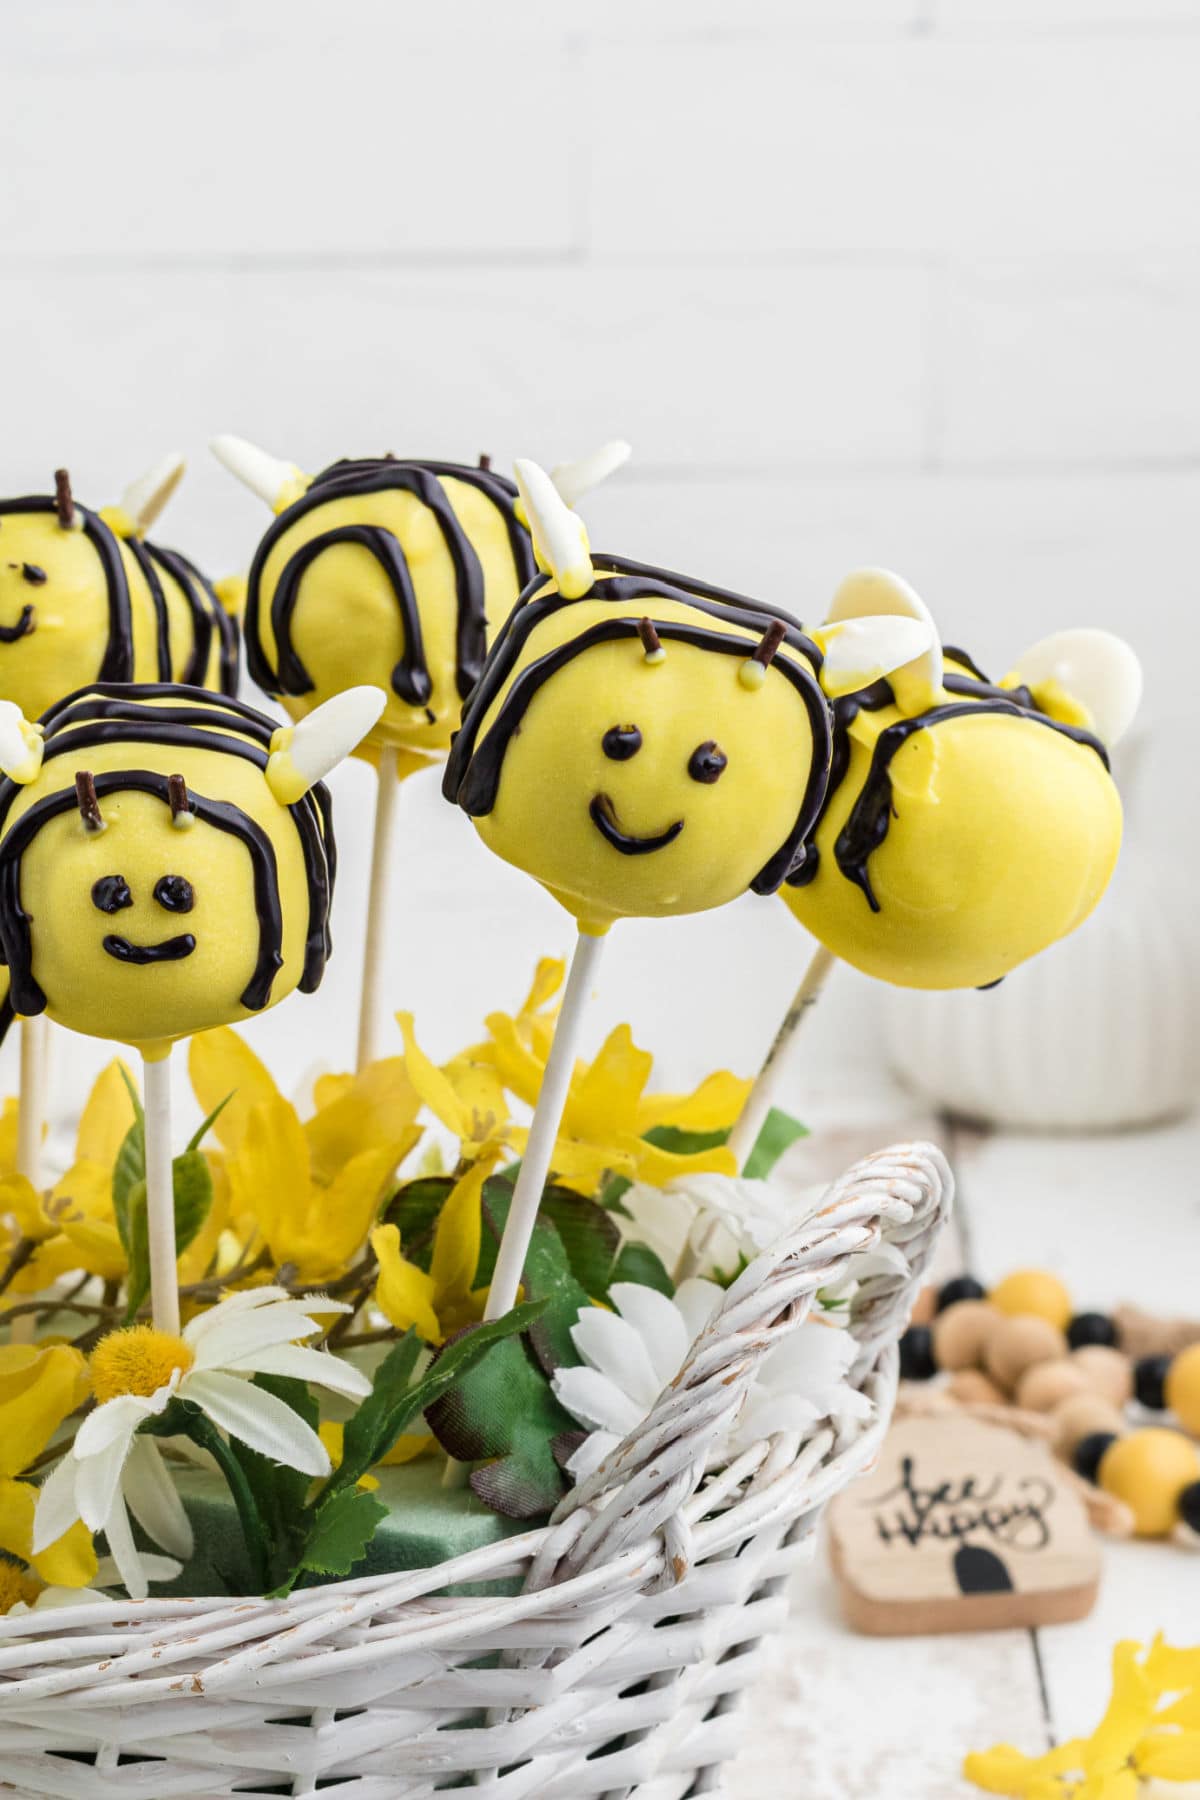 Several finished bumble bee cake pops standing up in a basket of flowers.